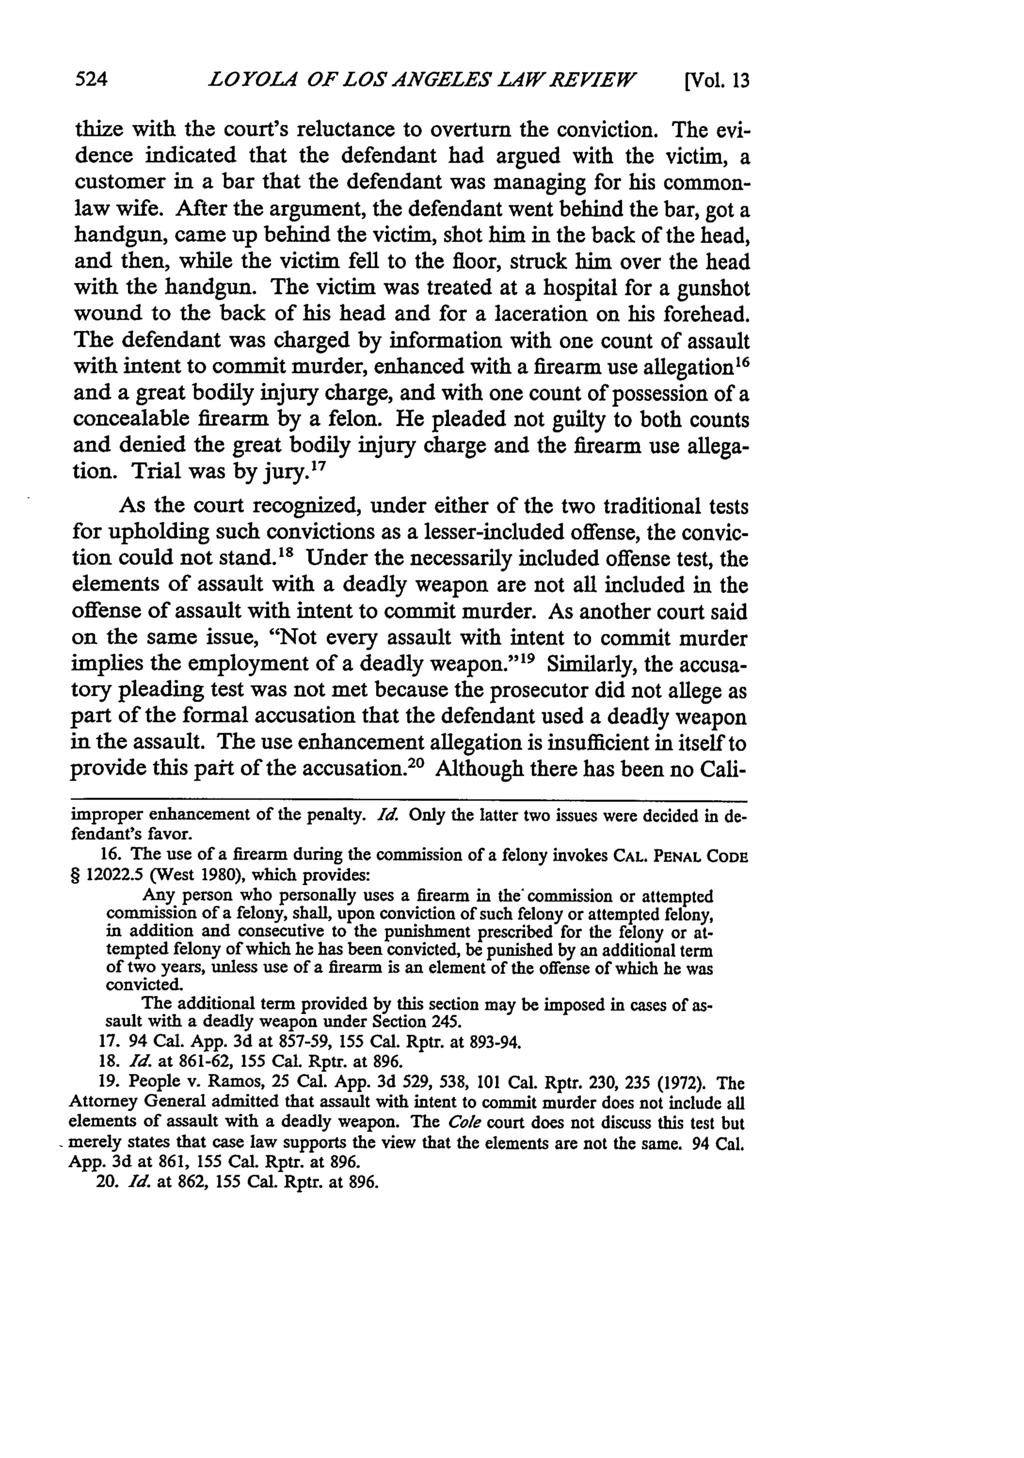 LOYOLA OF LOS ANGELES LAW REVIEW [Vol. 13 thize with the court's reluctance to overturn the conviction.